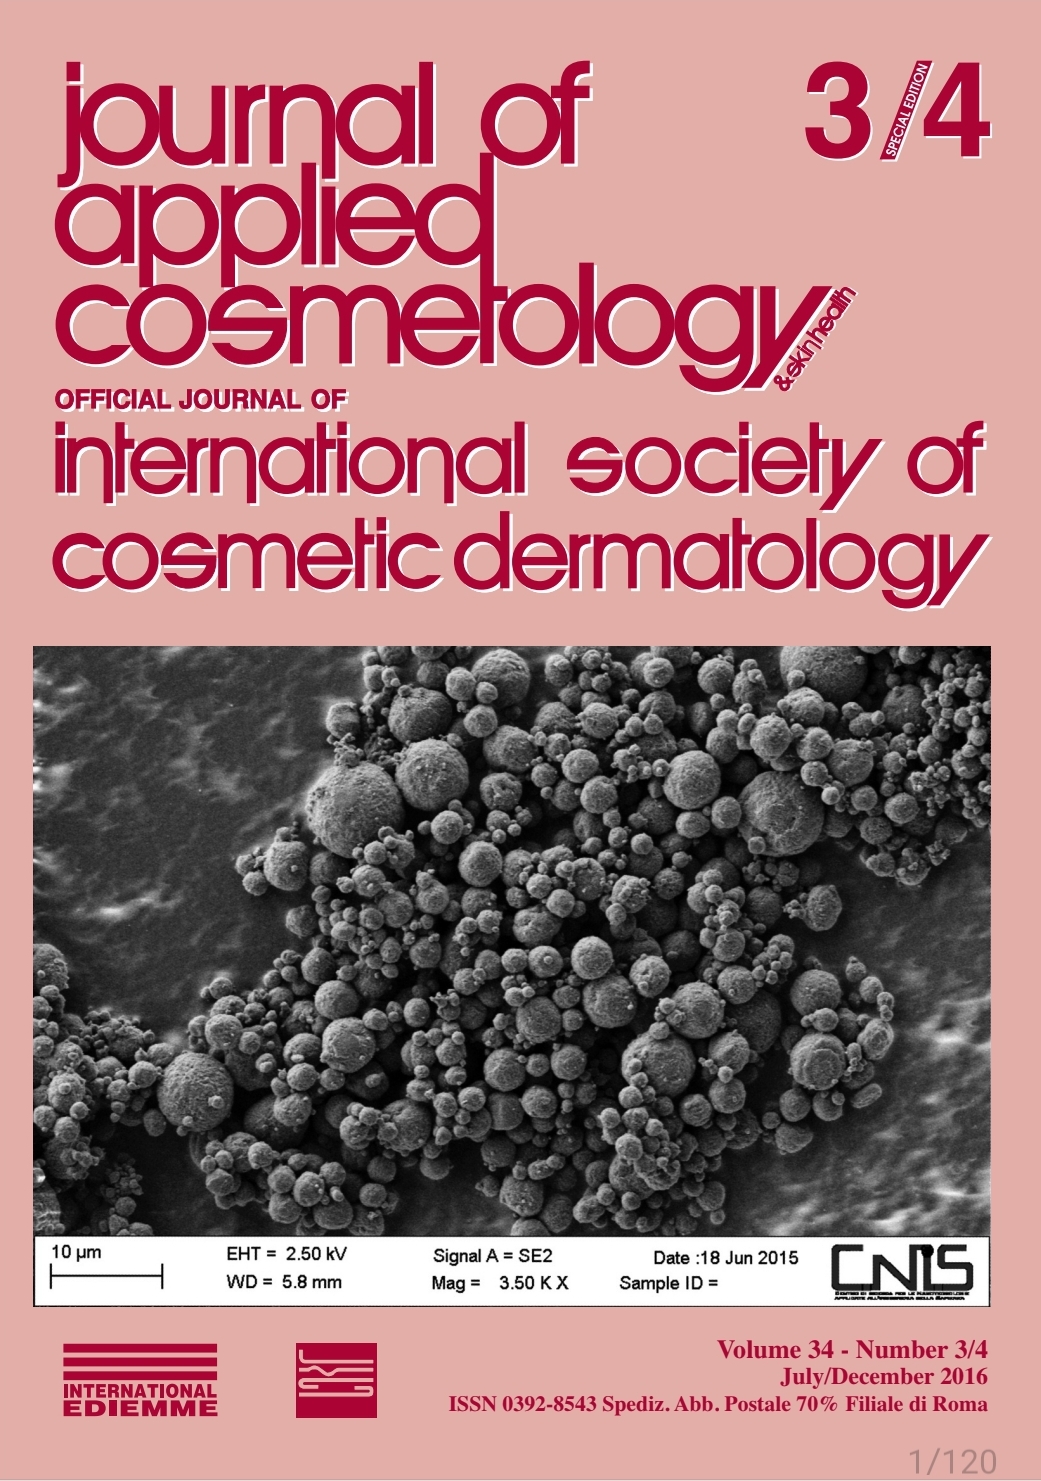 					View Vol. 34 No. 3/4 (2016): Journal of Applied Cosmetology
				